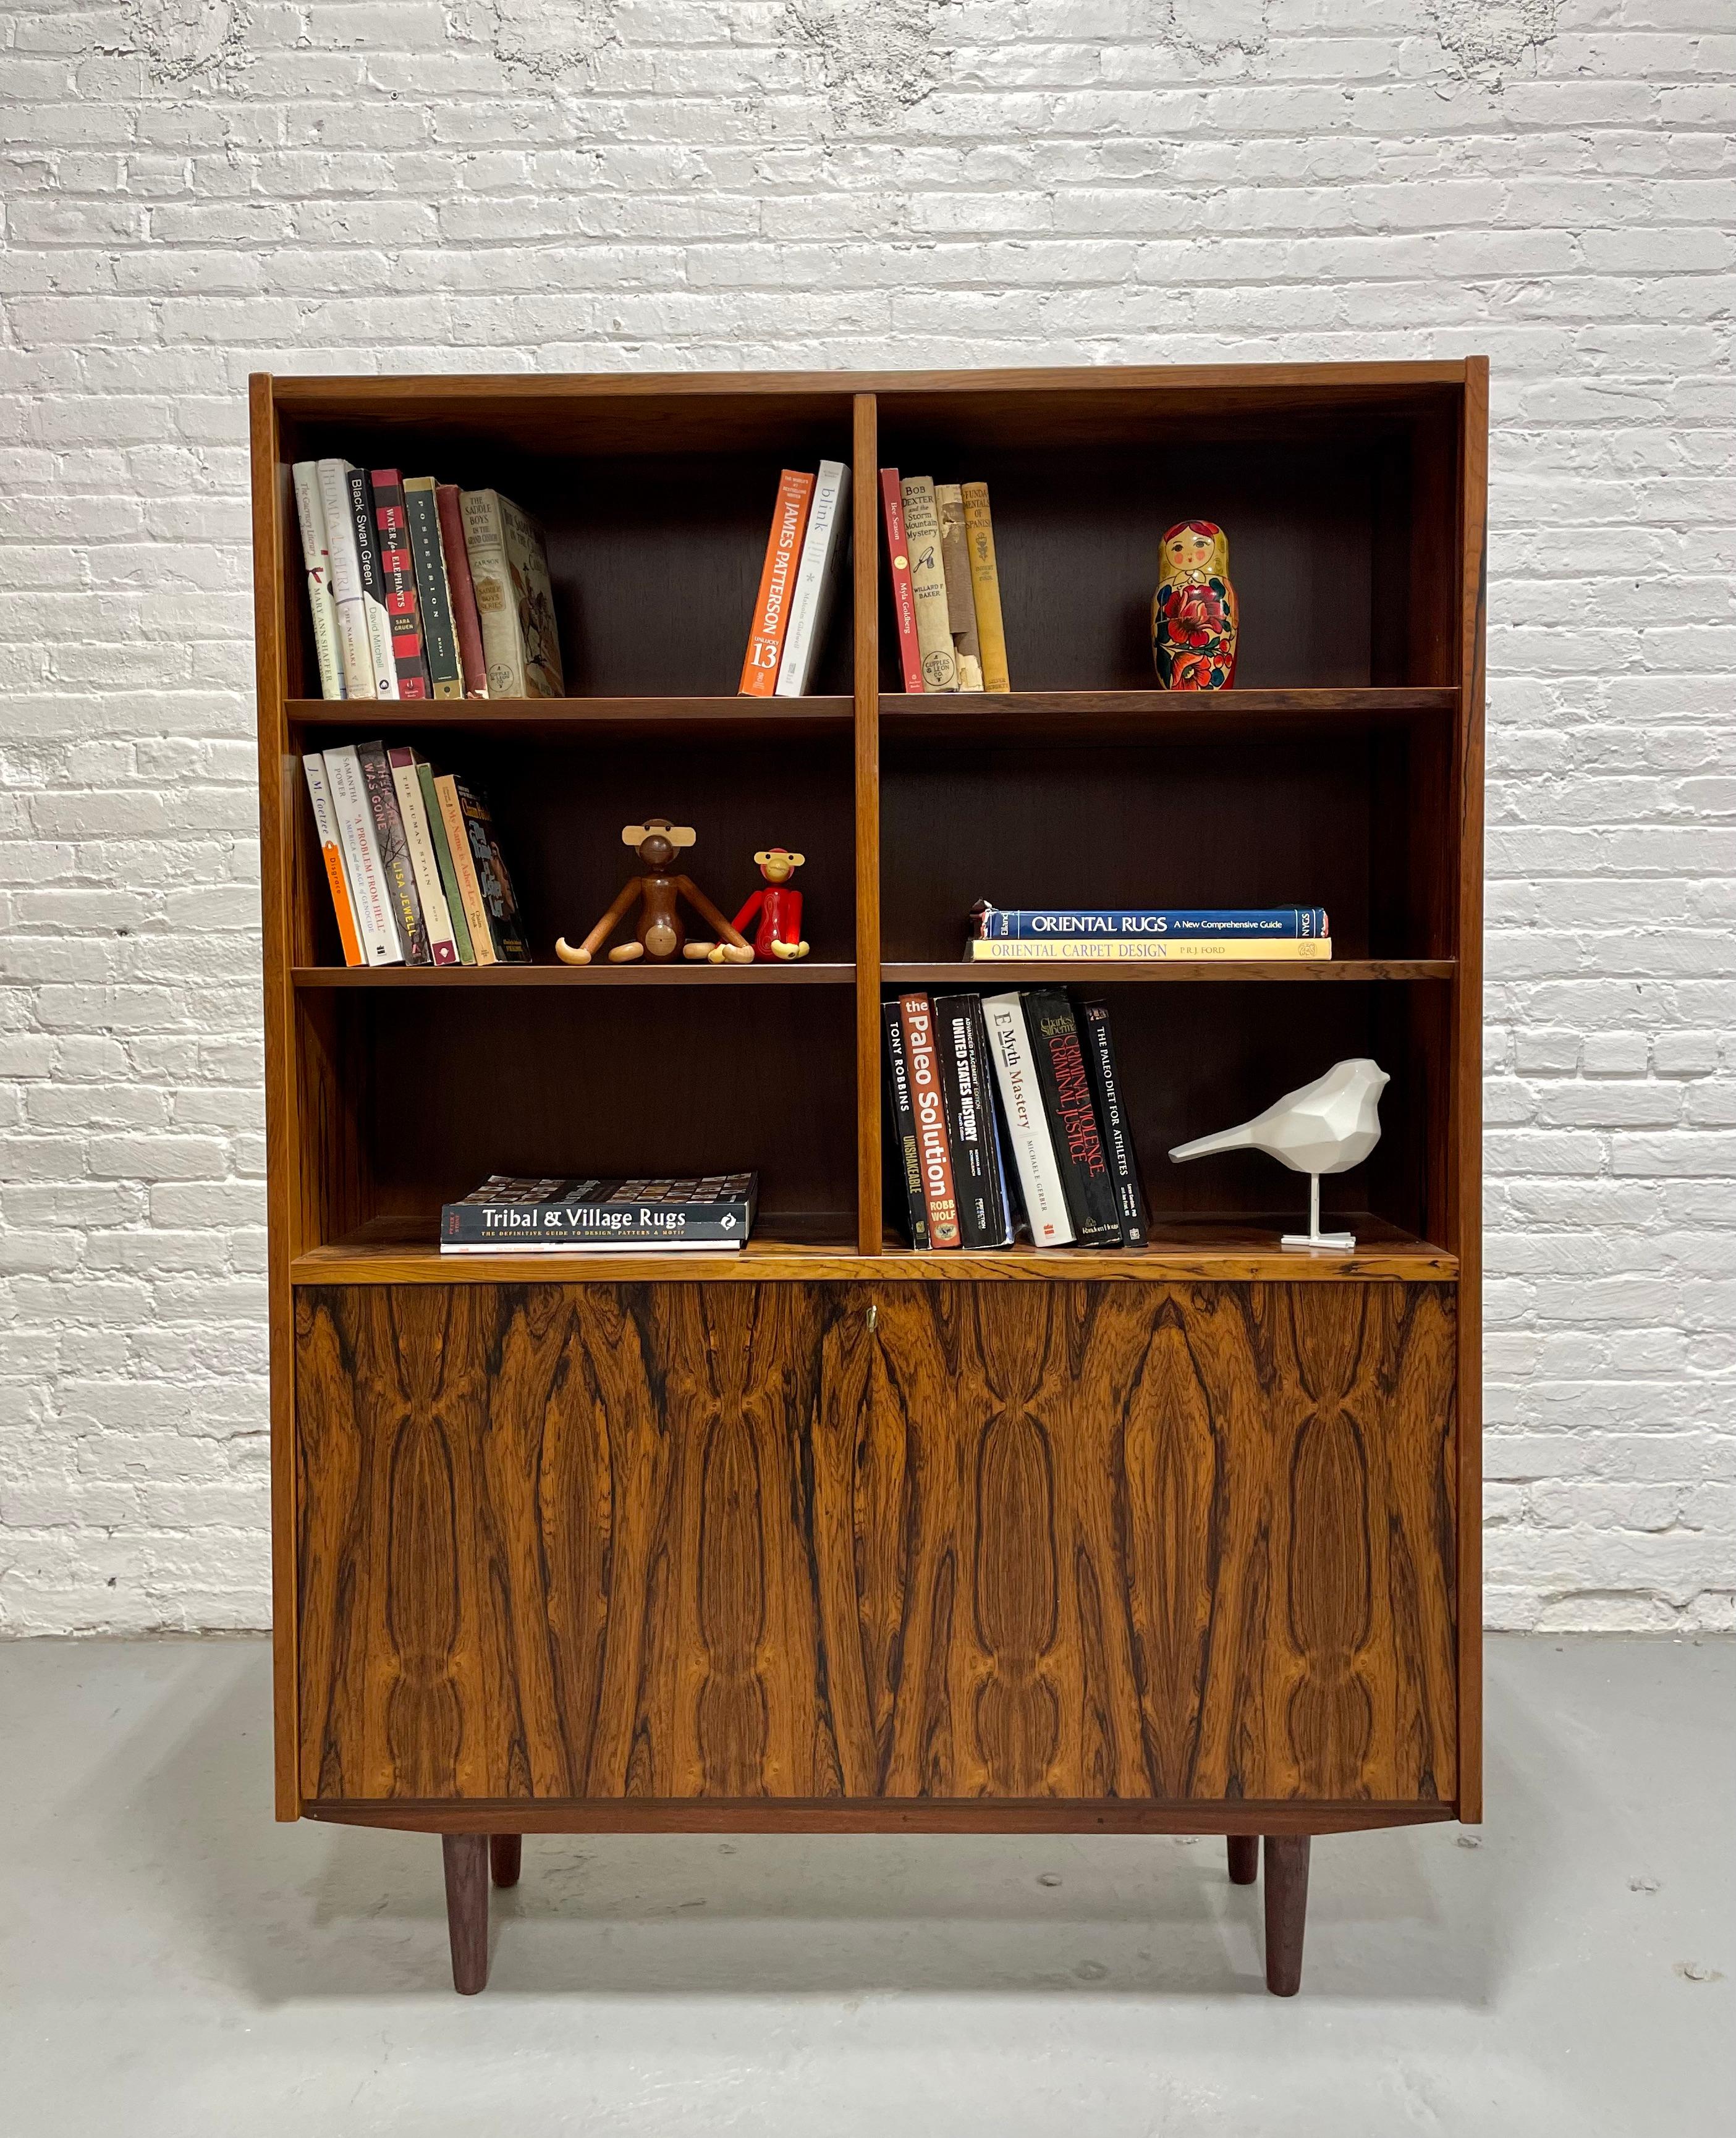 Mid Century Modern ROSEWOOD bookcase / China Cabinet, c. 1960's with super stand out wood grains. This stunning piece features 6 shelving areas in the upper area and all shelves are removable and adjustable. The lower area unlocks (yes, we have the